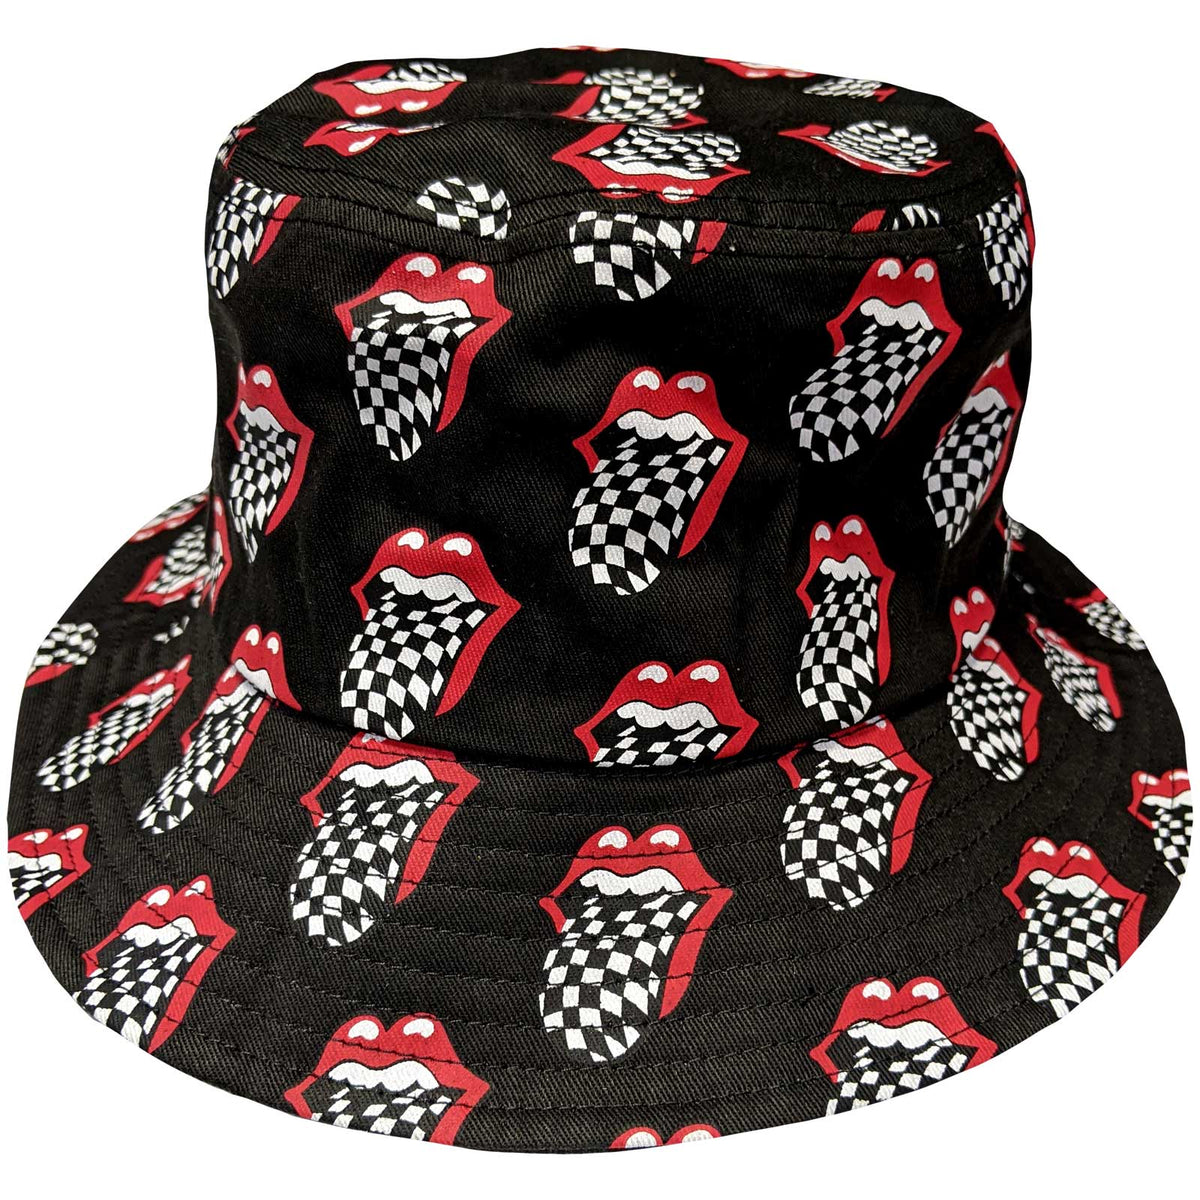 The Rolling Stones Bucket Hat - Checker Tongue - Official Licensed Product